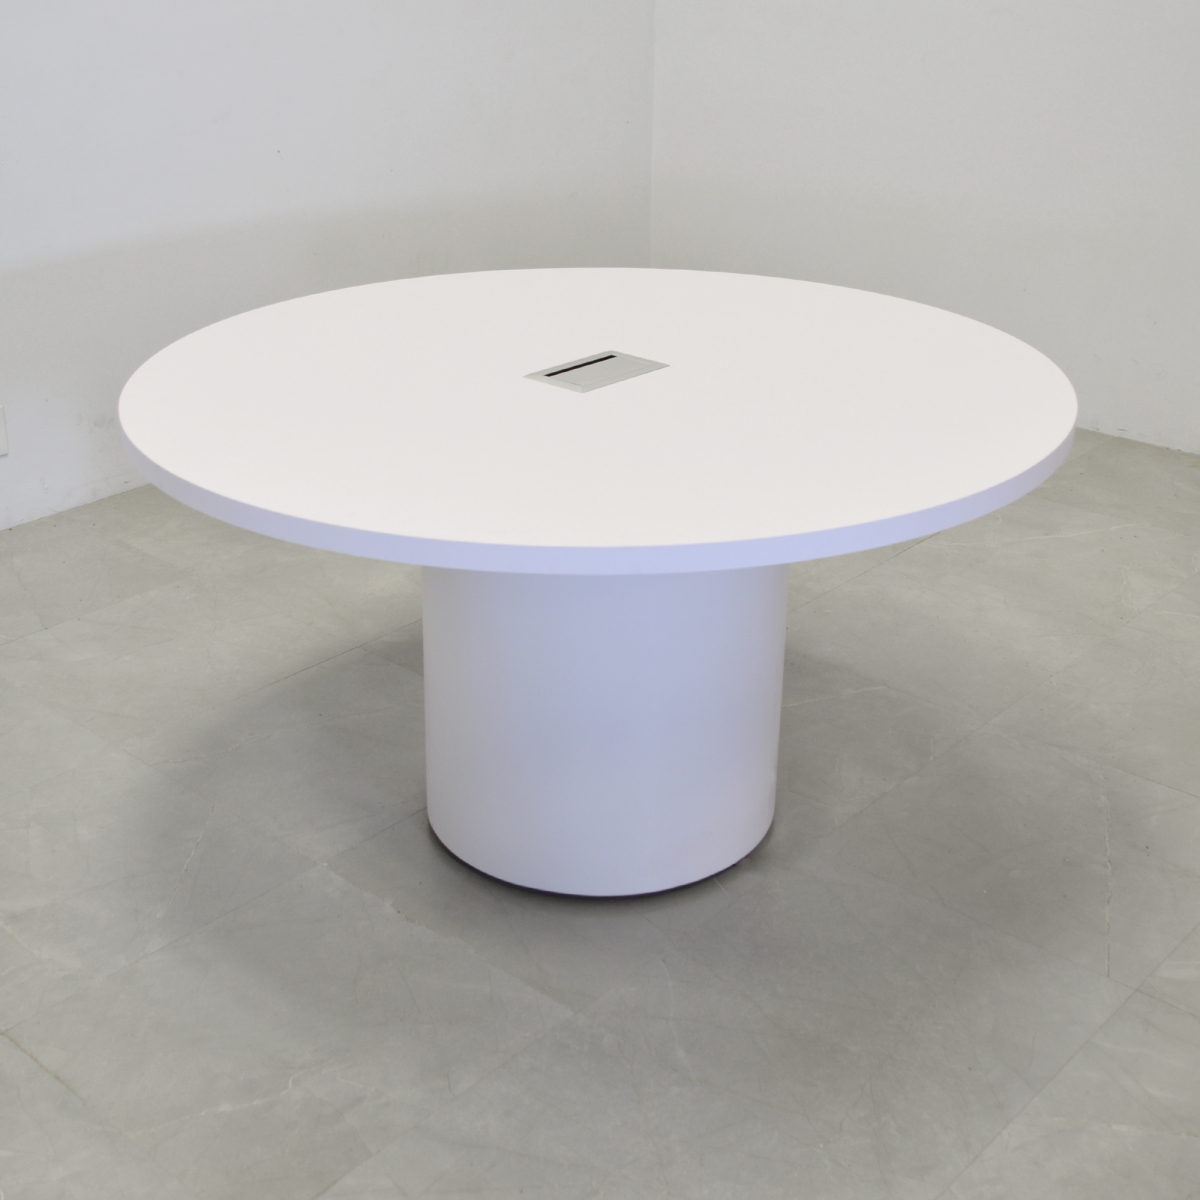 60 In. Axis Round Meeting Table -Stock # 1002-S